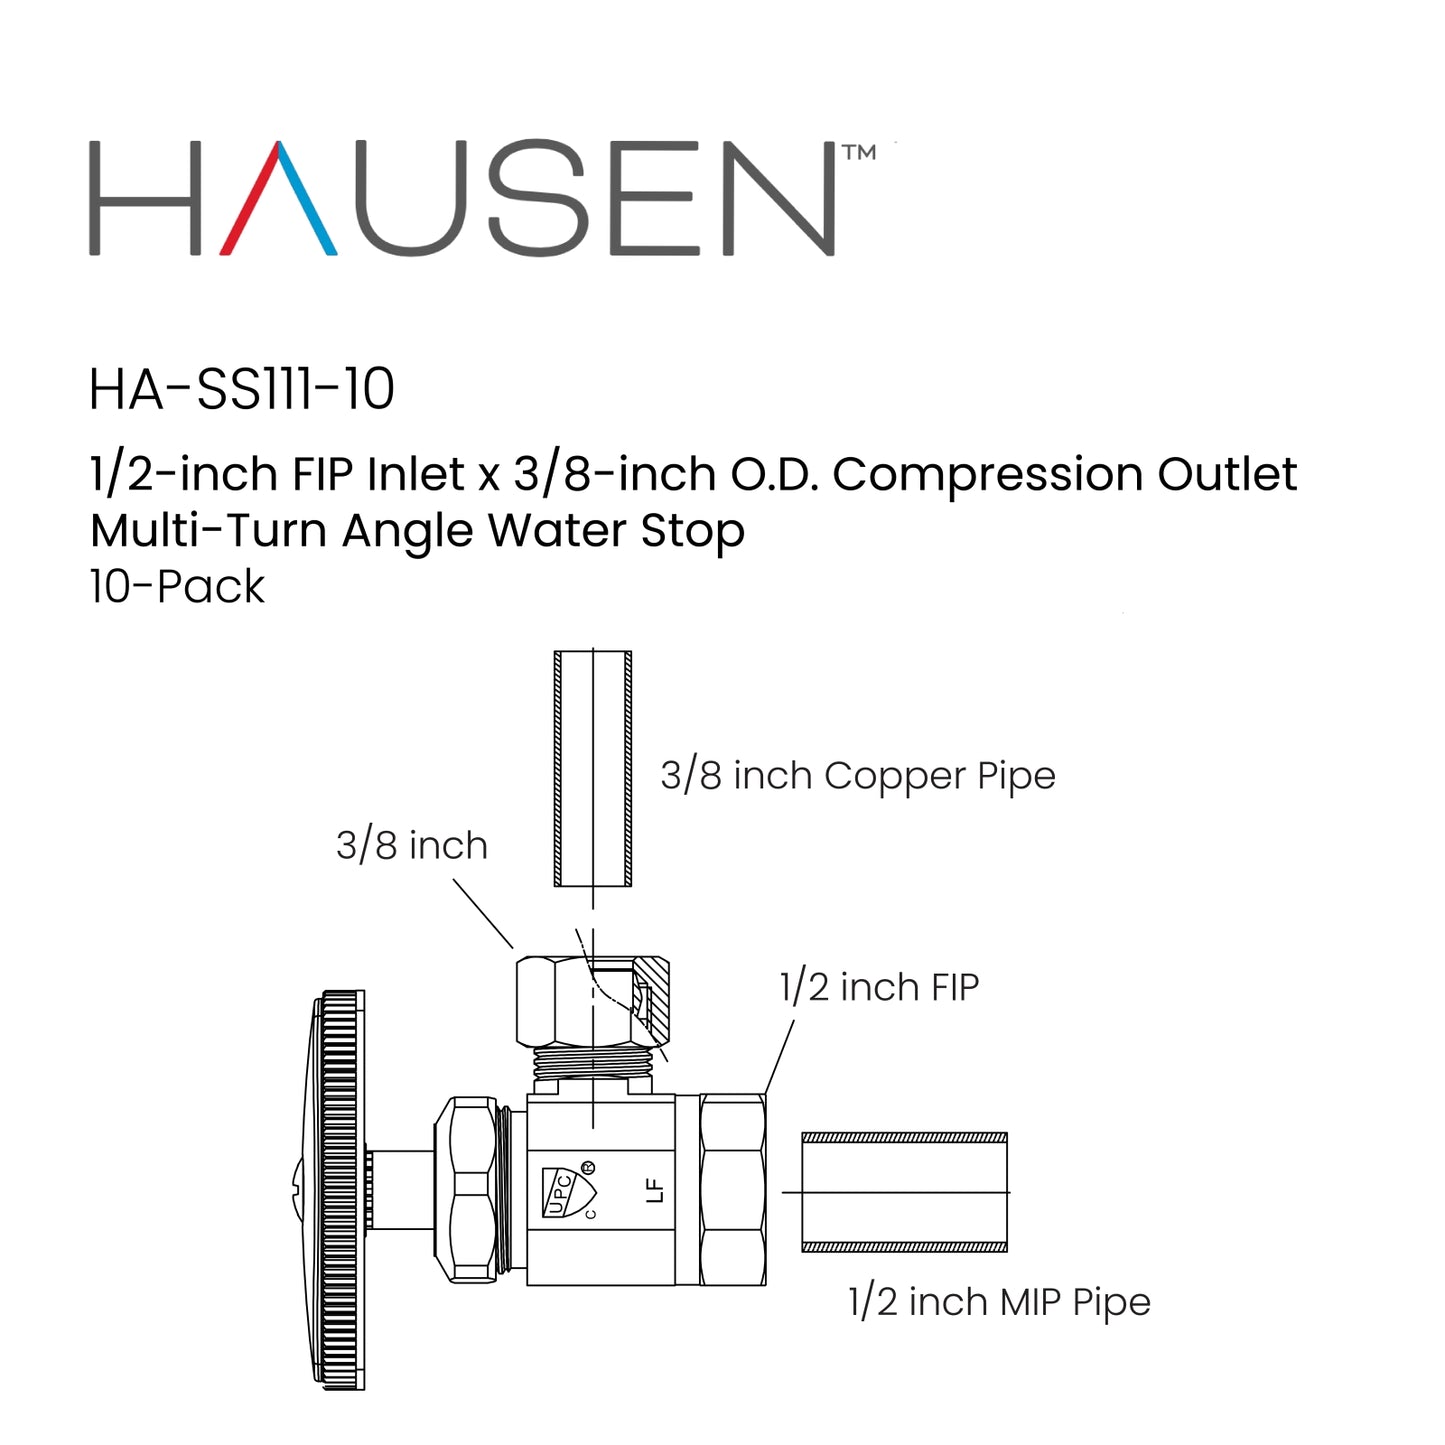 Hausen 1/2-inch FIP Inlet x 3/8-inch O.D. Compression Outlet Multi-Turn Angle Water Stop; Lead-Free Forged Brass; Chrome-Plated; cUPC/ANSI/NSF Certified; Compatible with Iron and Copper Piping, 10-Pack